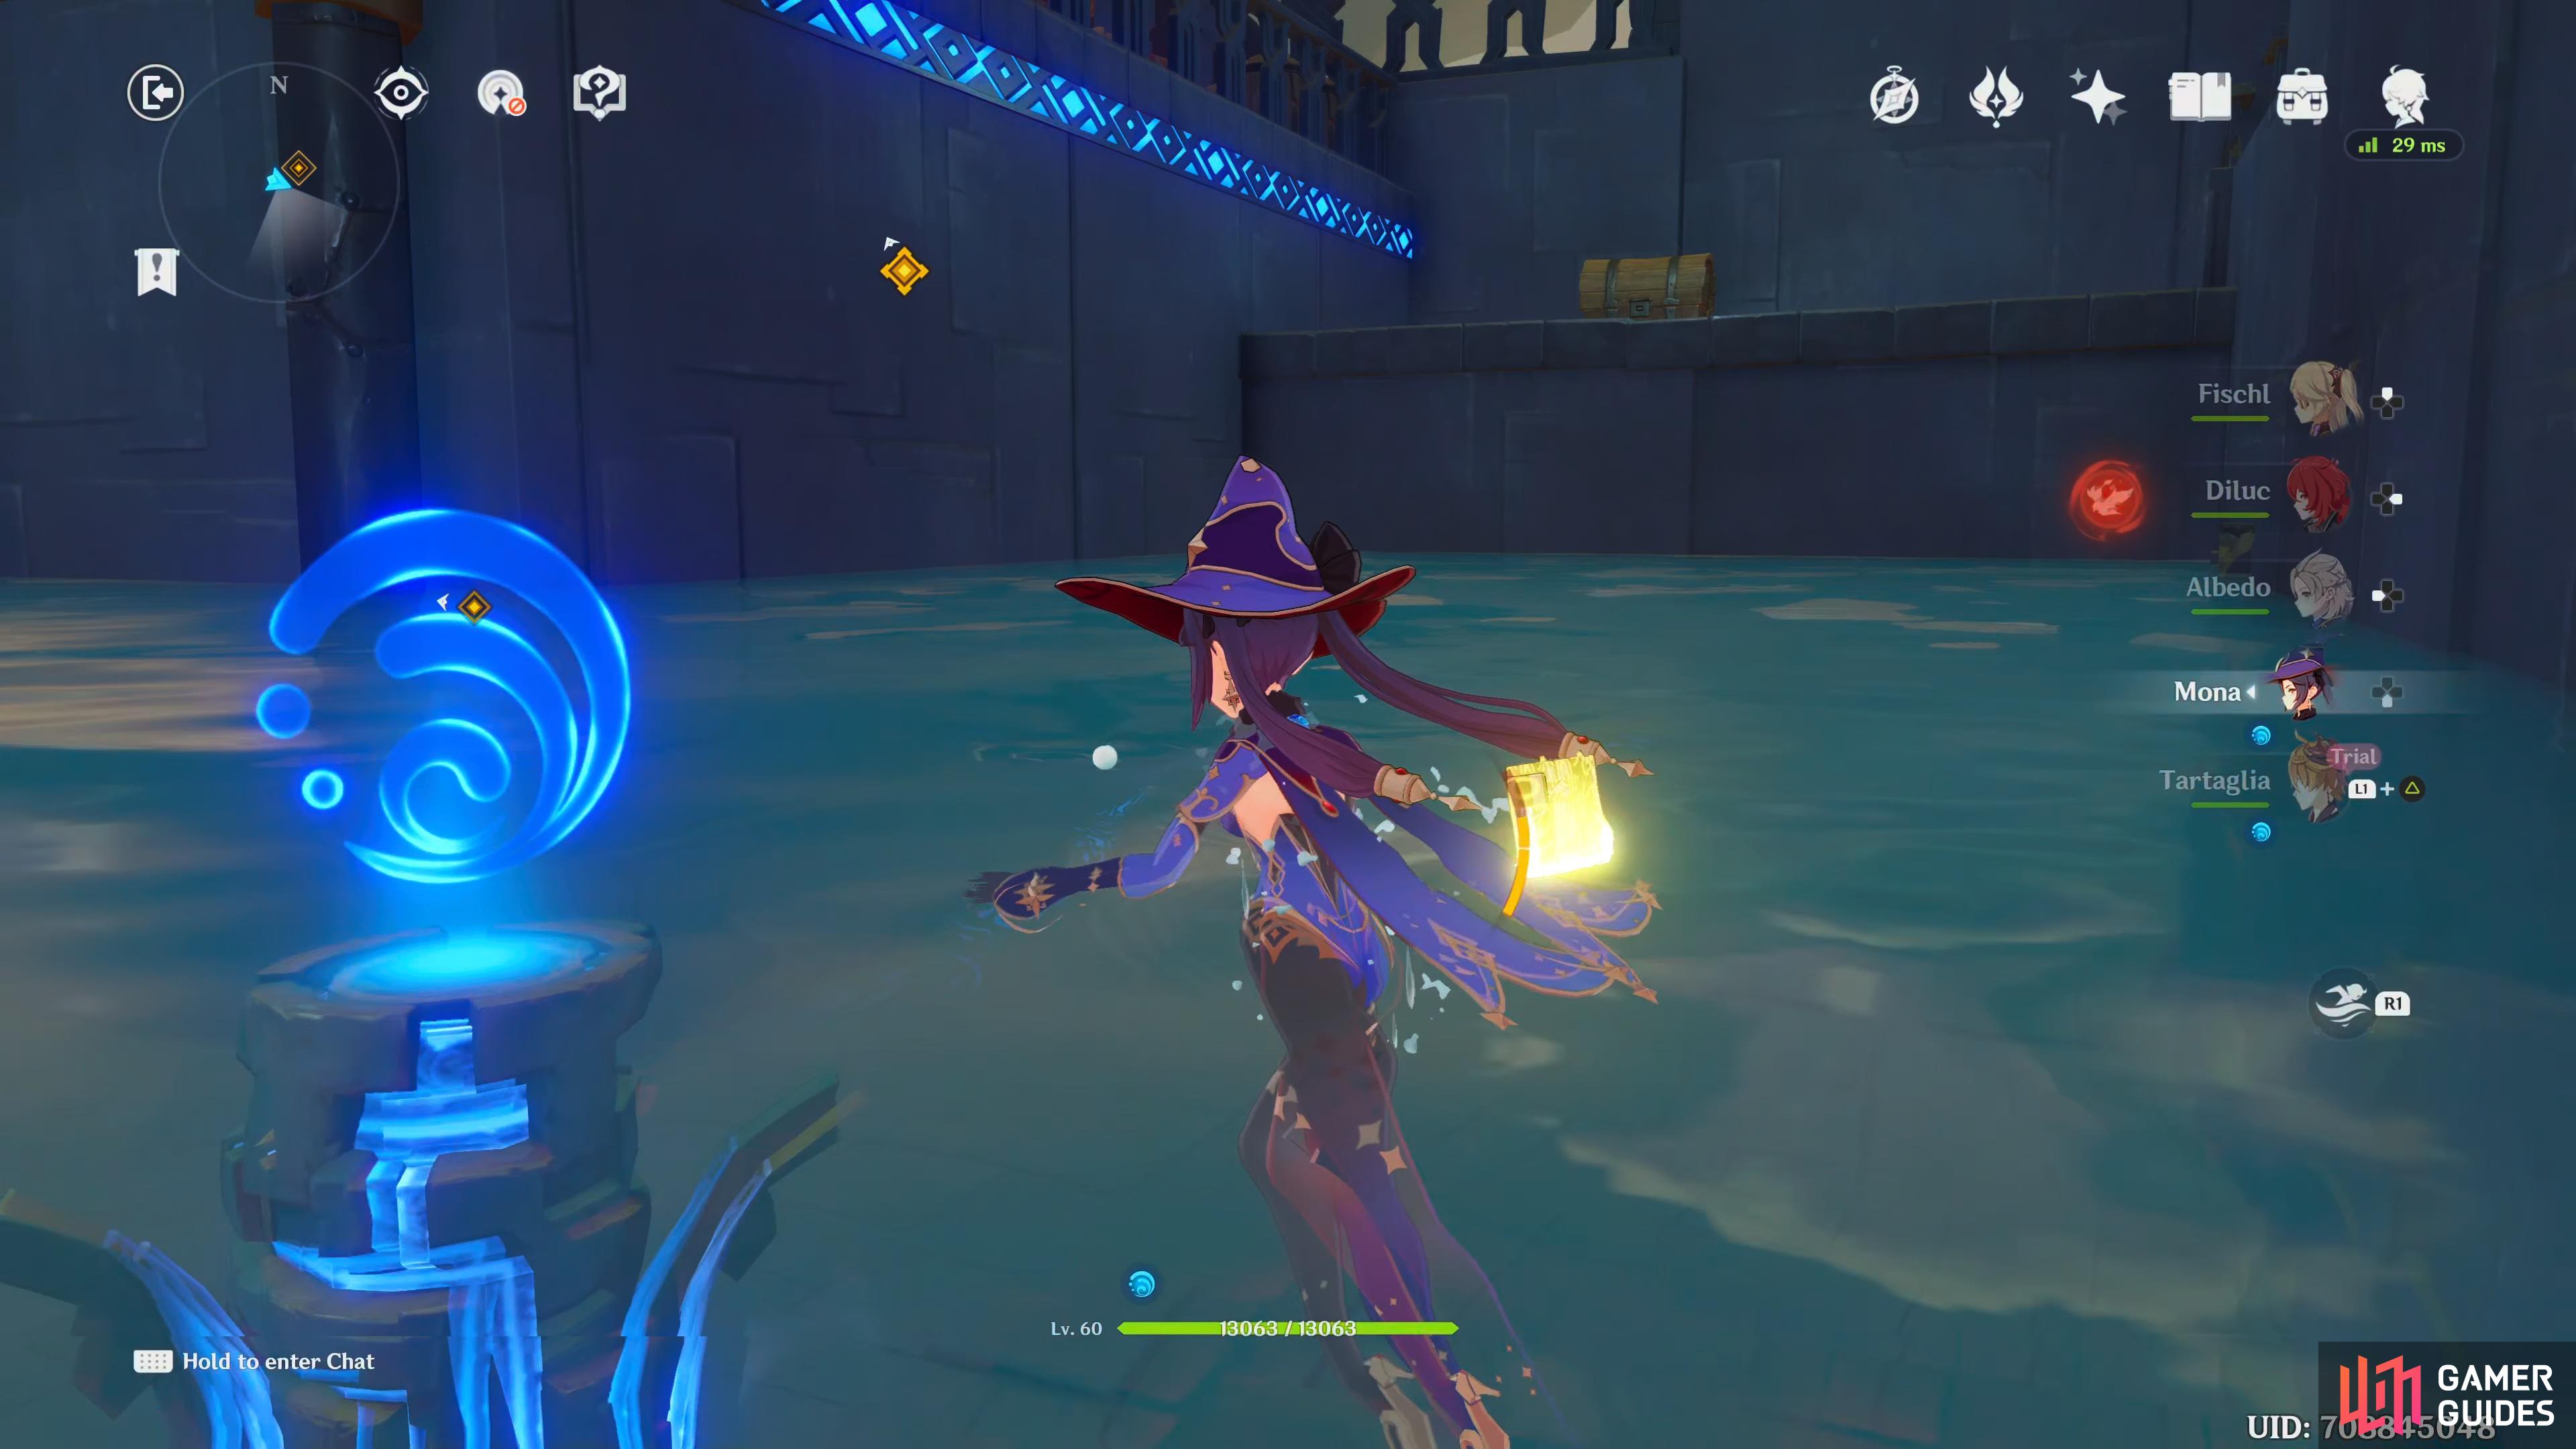 Head to the chest as soon as you activate the totem and the water level begins to rise